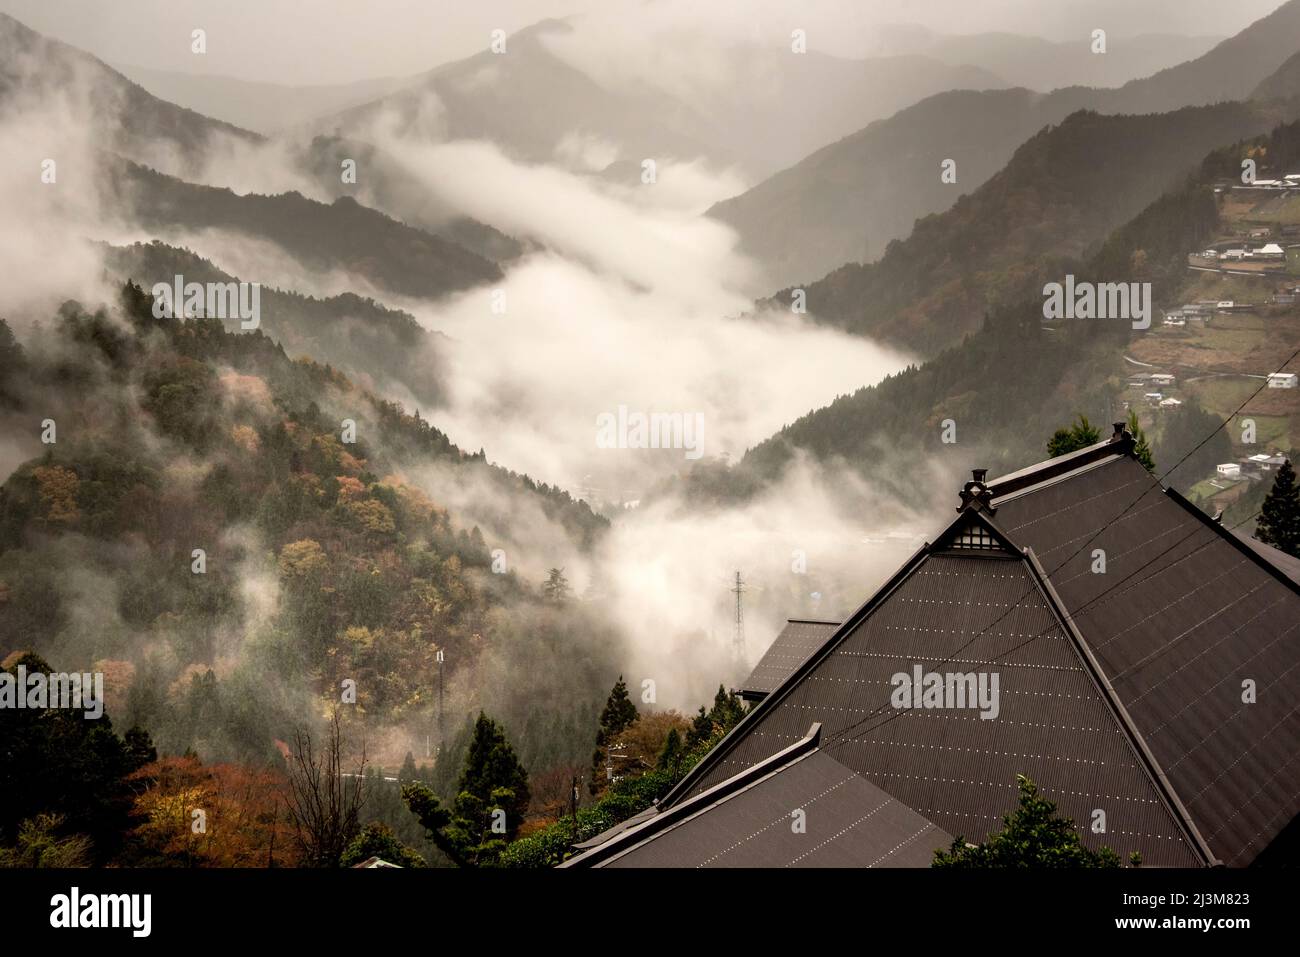 Fog over Japan’s Iya Valley on the island of Shikoku. The Iya Valley is a remote, mountainous valley in western Tokushima Prefecture. Located deep ... Stock Photo